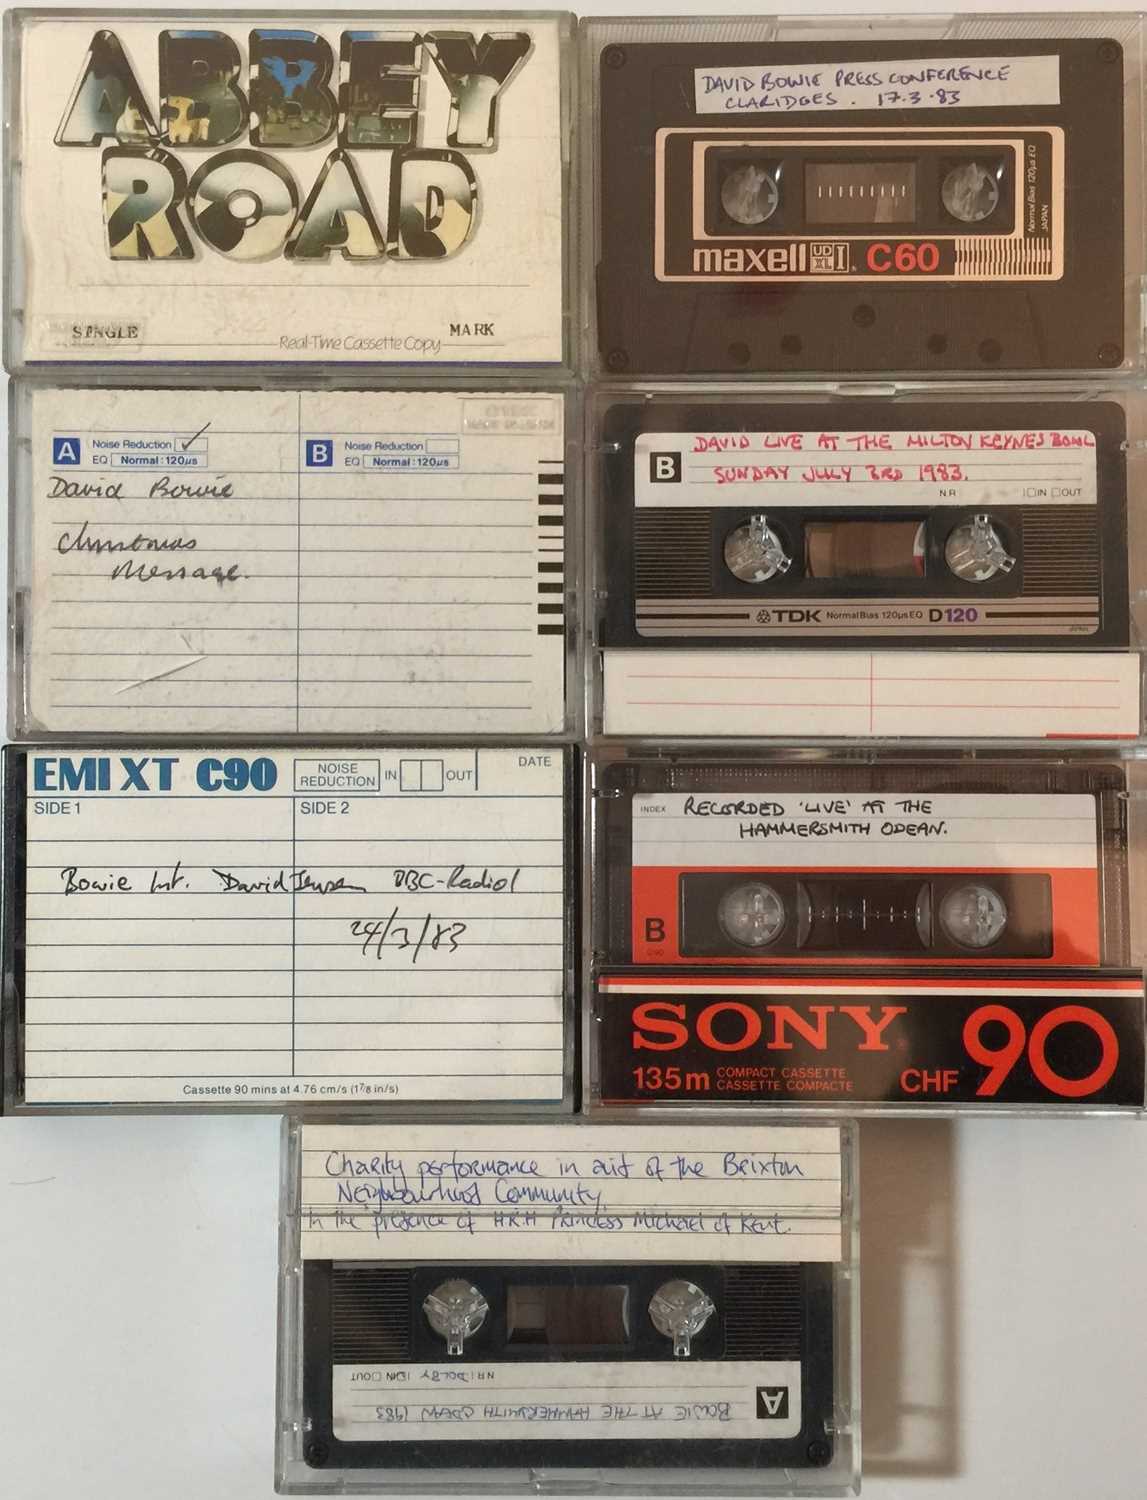 David Bowie - Cassette Collection Including Abbey Road Studio Demo